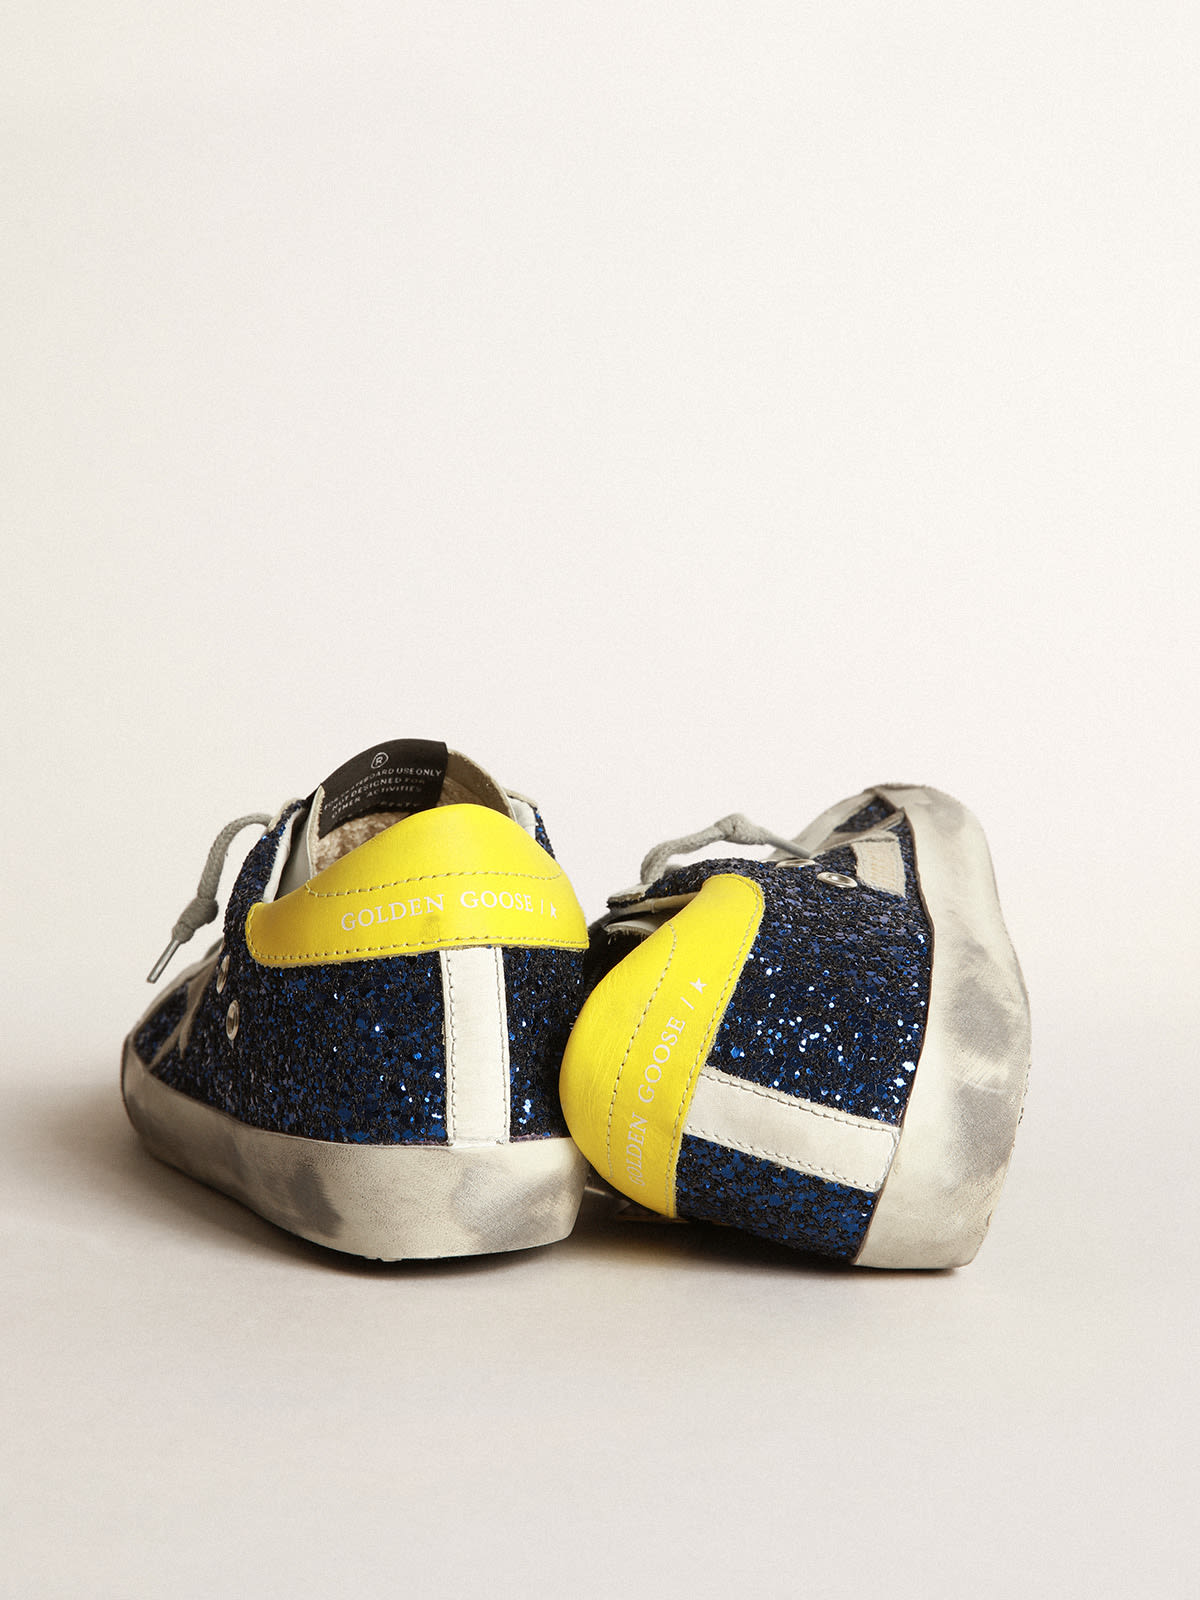 Golden Goose - Super-Star sneakers with blue glitter and yellow heel tab in 